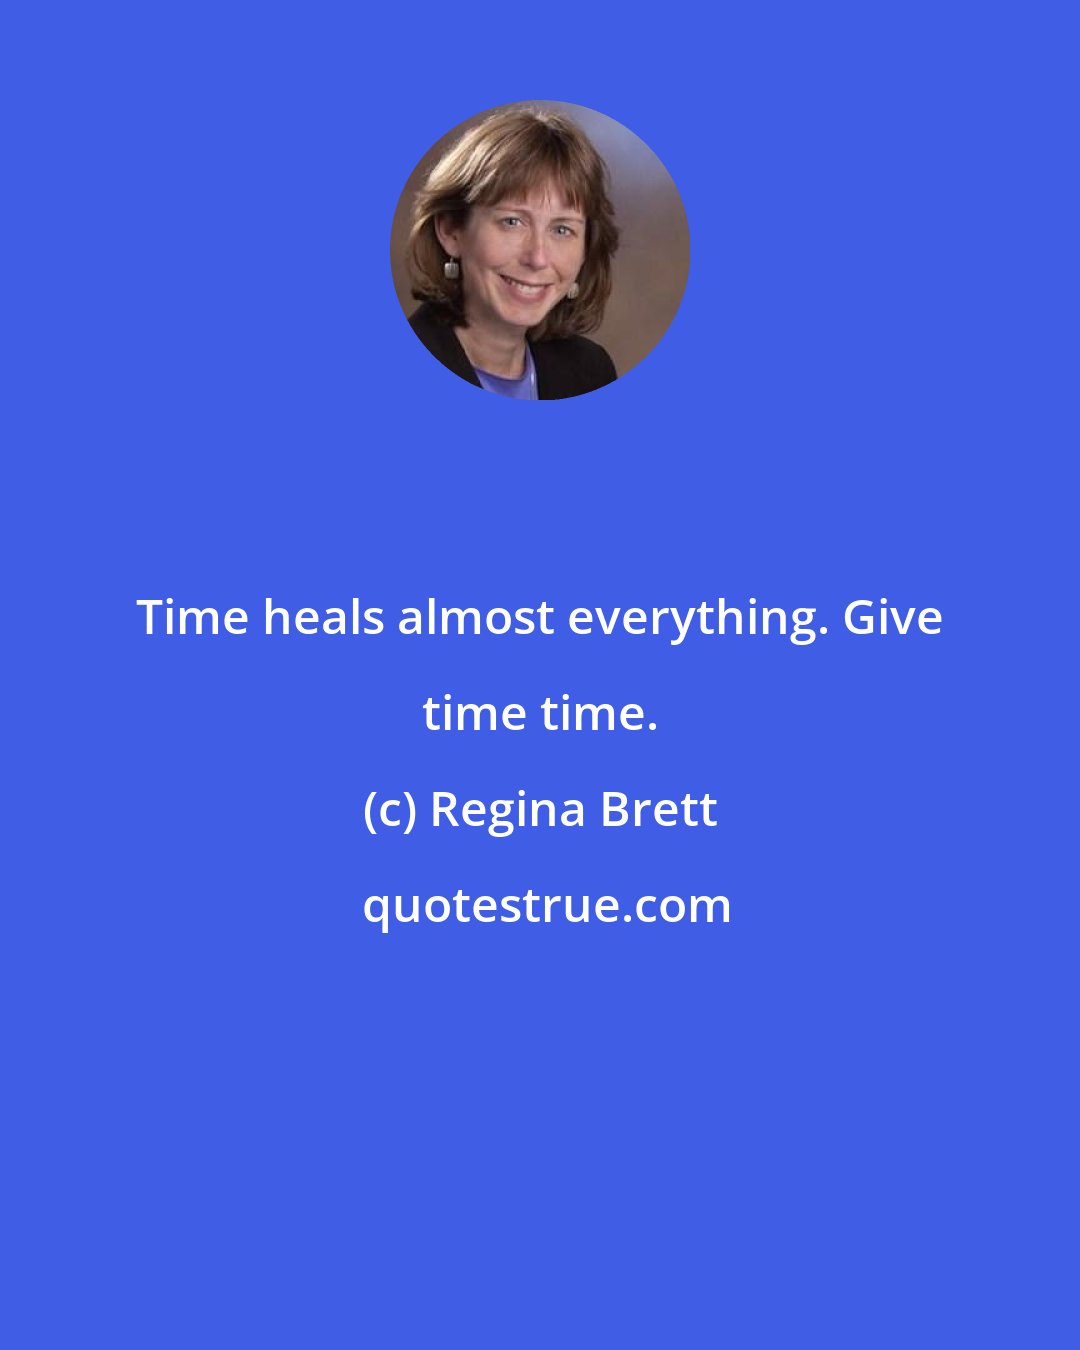 Regina Brett: Time heals almost everything. Give time time.